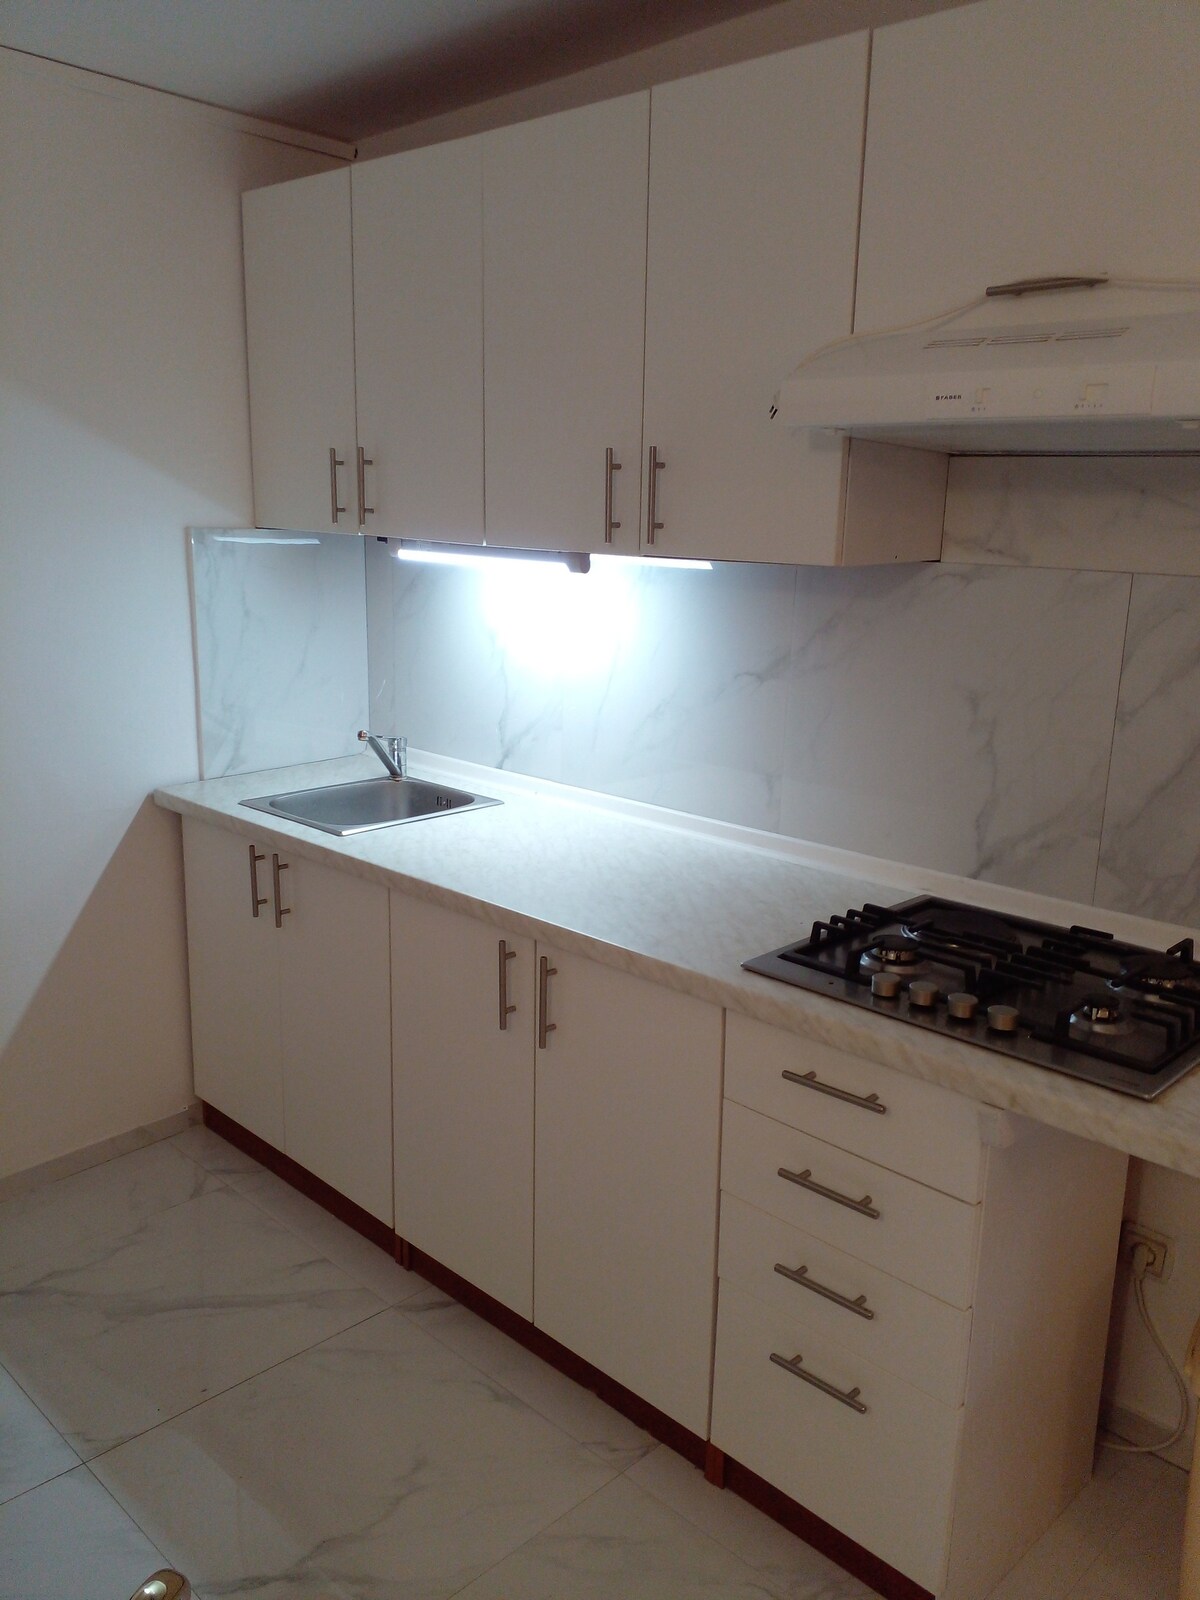 A-22083-b One bedroom apartment with terrace Vir -